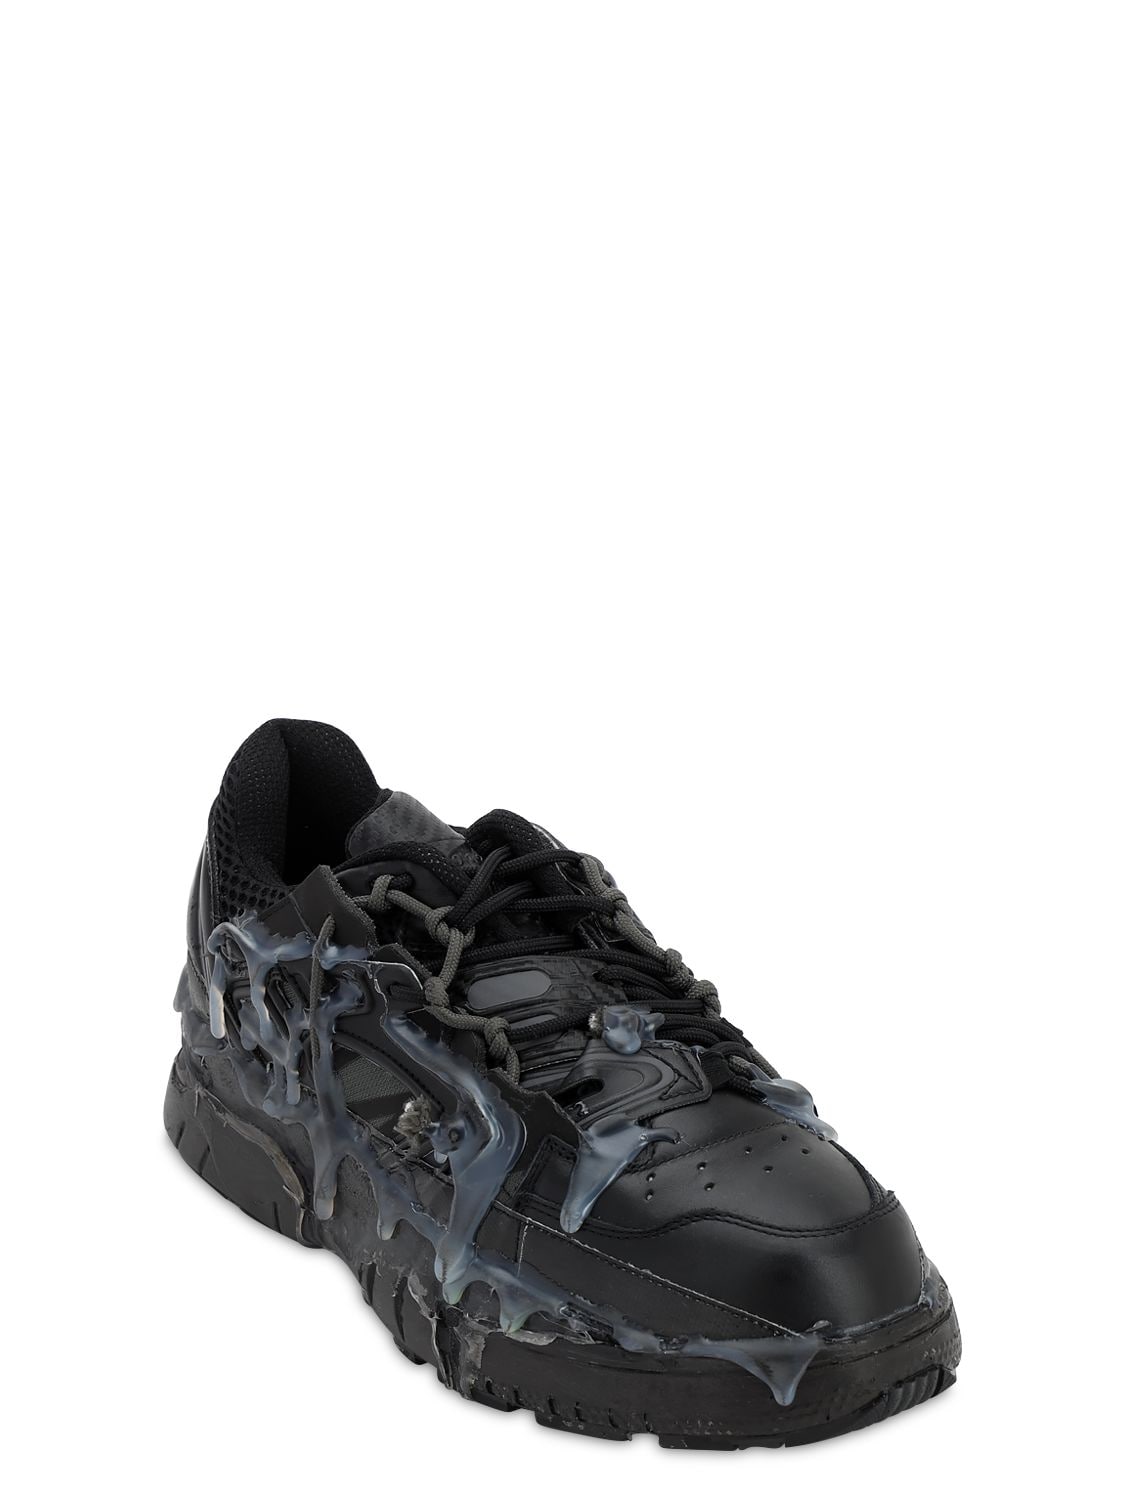 Maison Margiela Fusion Leather And Mesh Trainers In T8013 Black | ModeSens